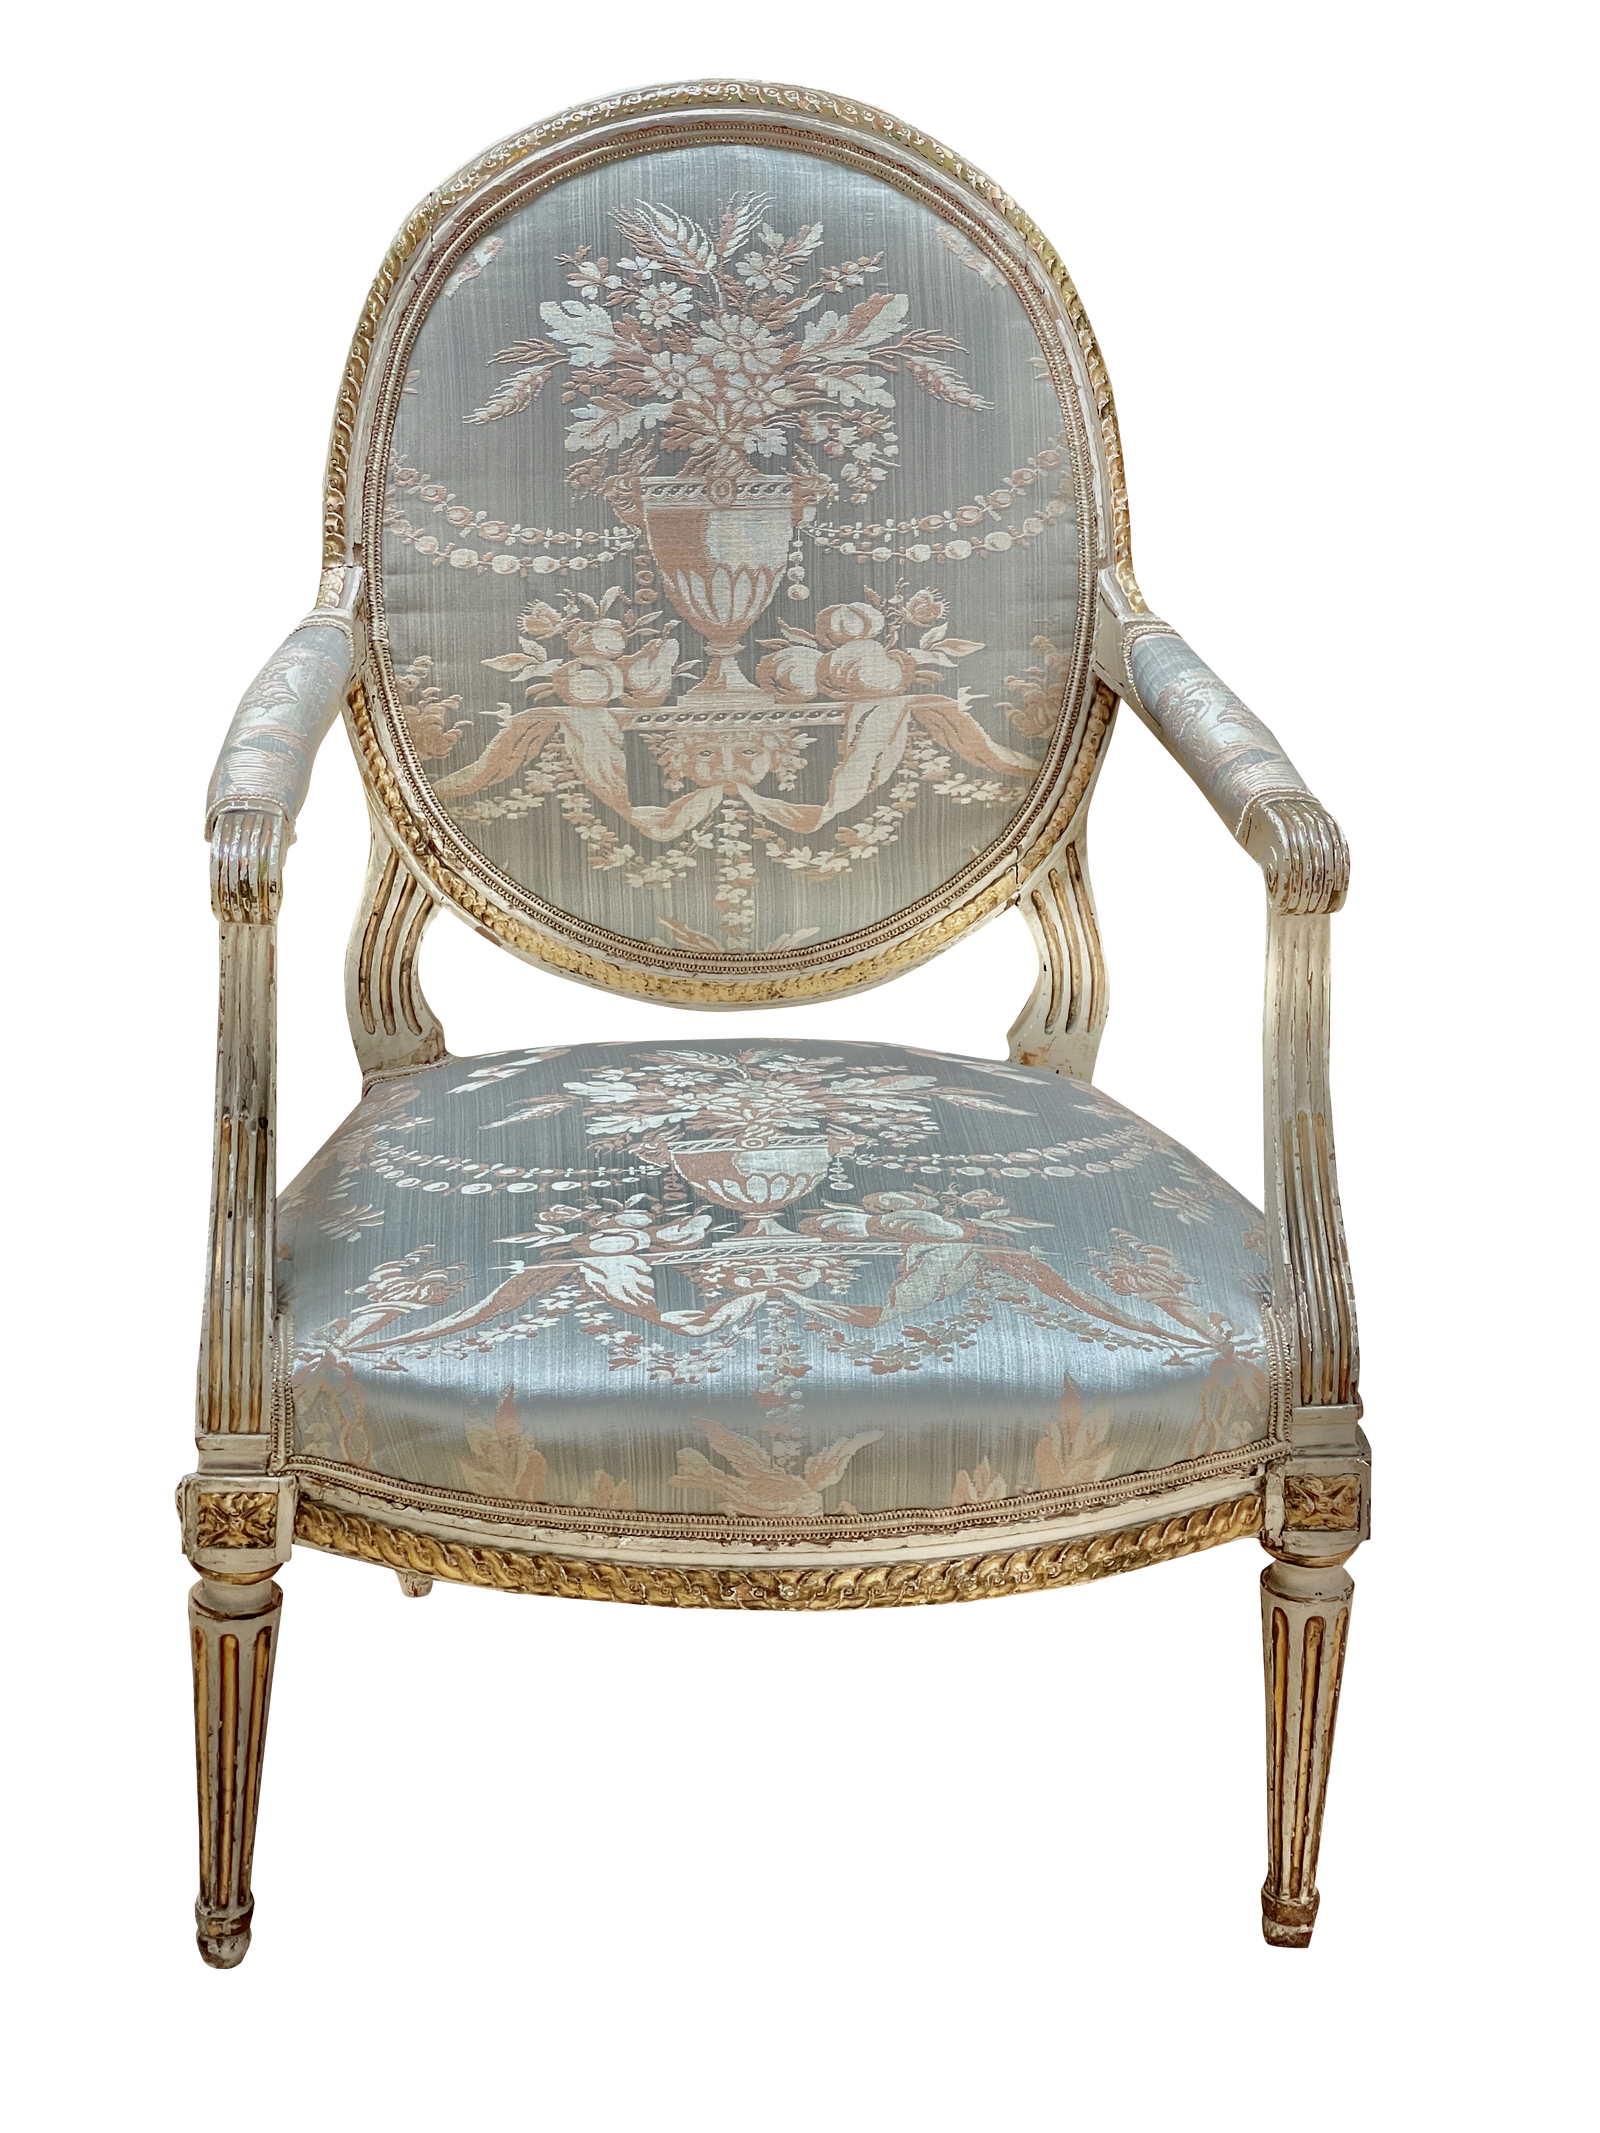 Pair of Period 18th Century French Louis XVI Walnut Fauteuil Arm